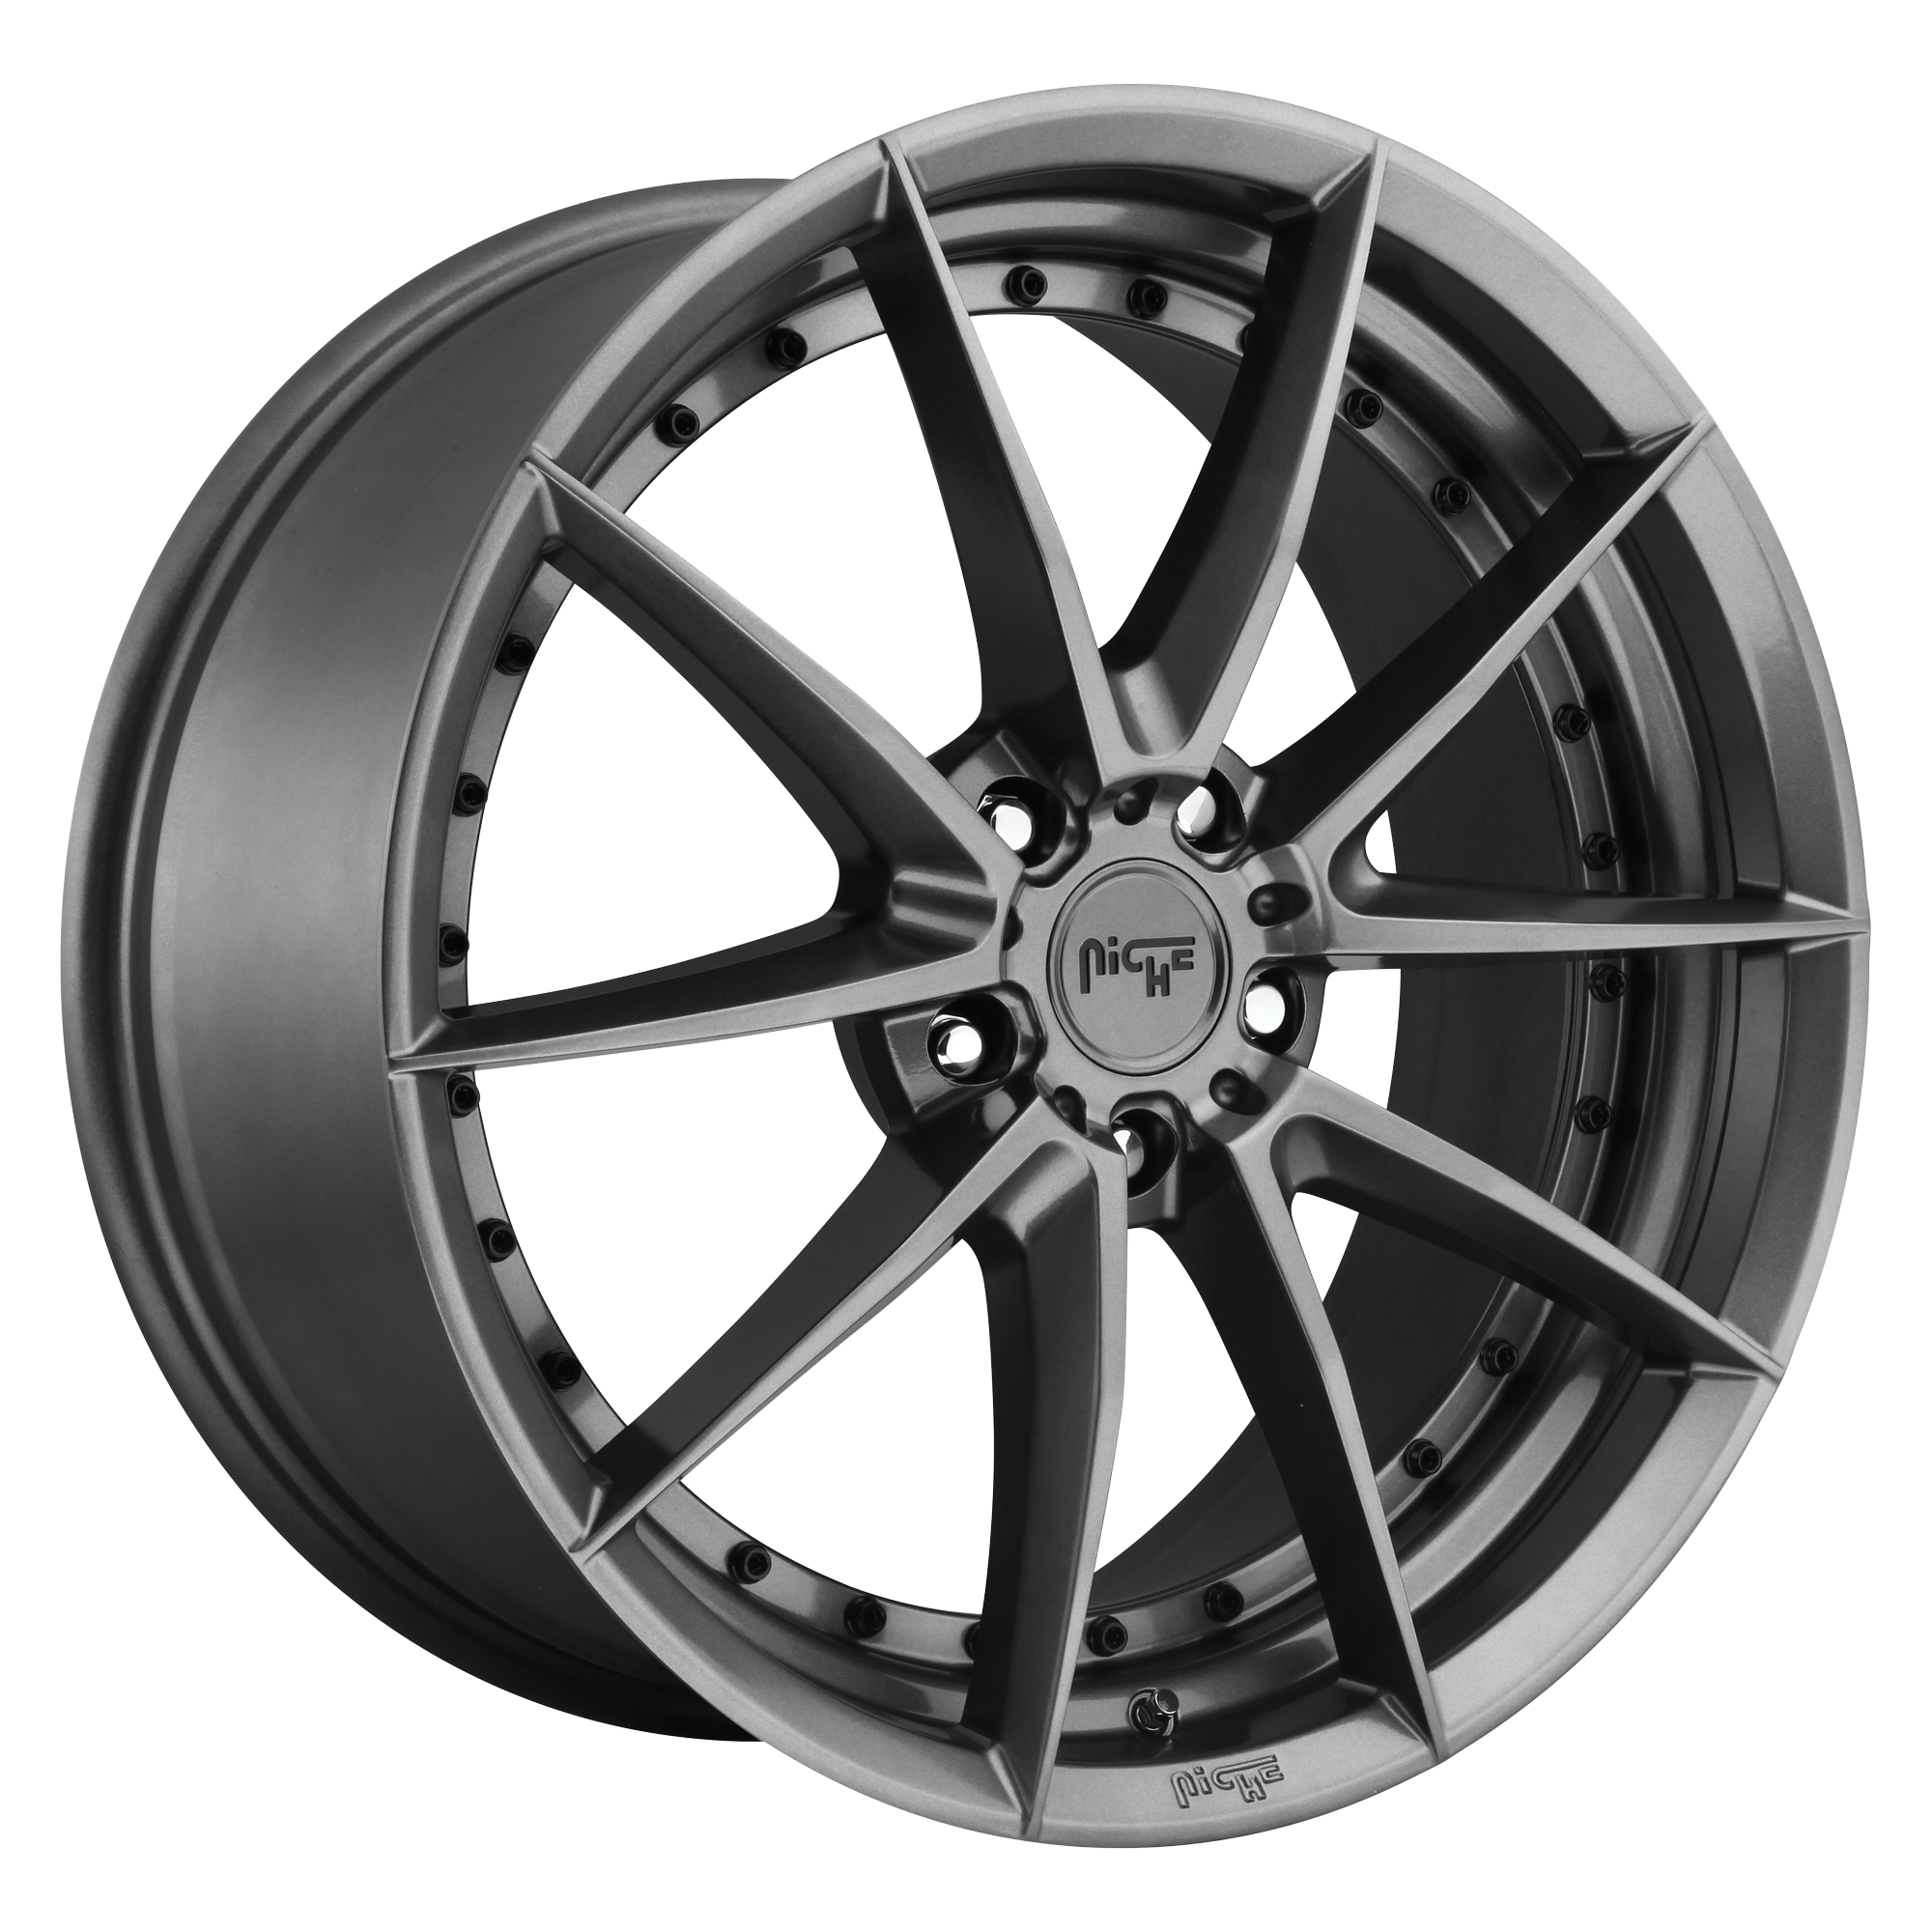 SECTOR 19x8.5 5x114.30 GLOSS ANTHRACITE (35 mm) - Tires and Engine Performance